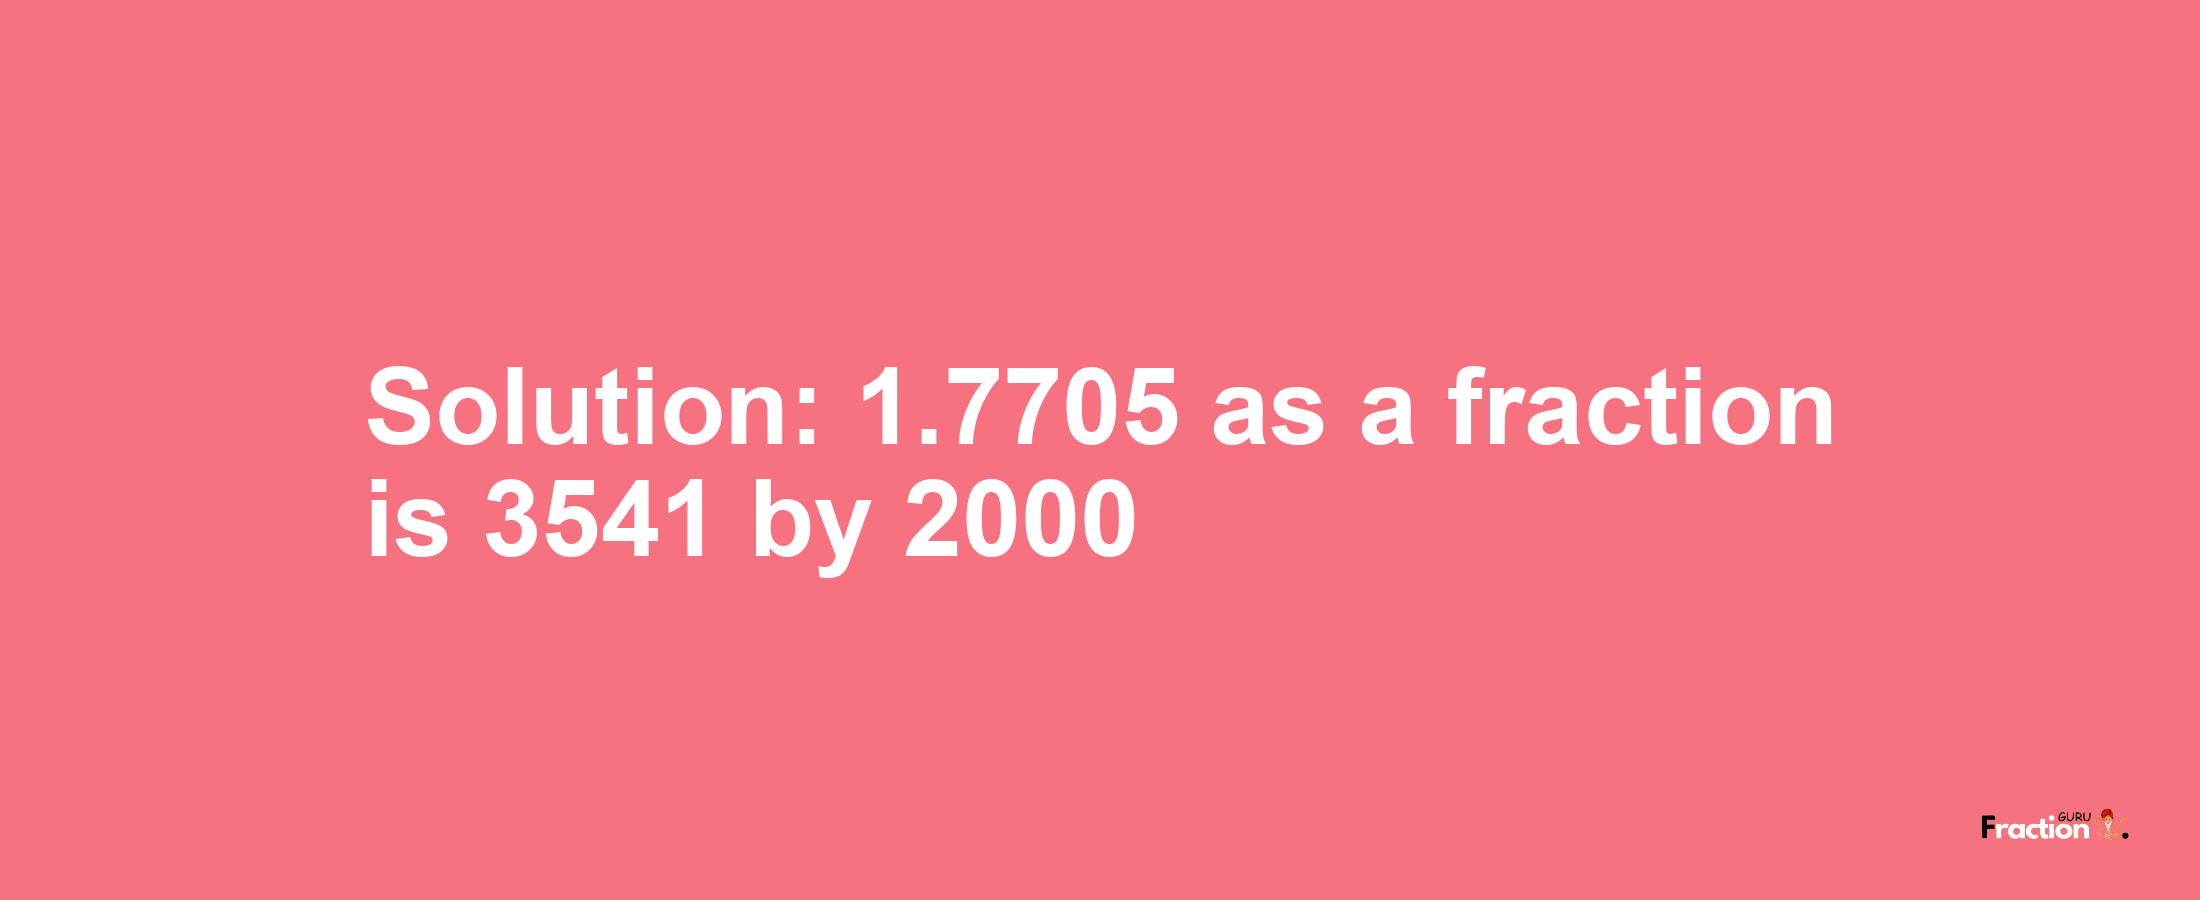 Solution:1.7705 as a fraction is 3541/2000